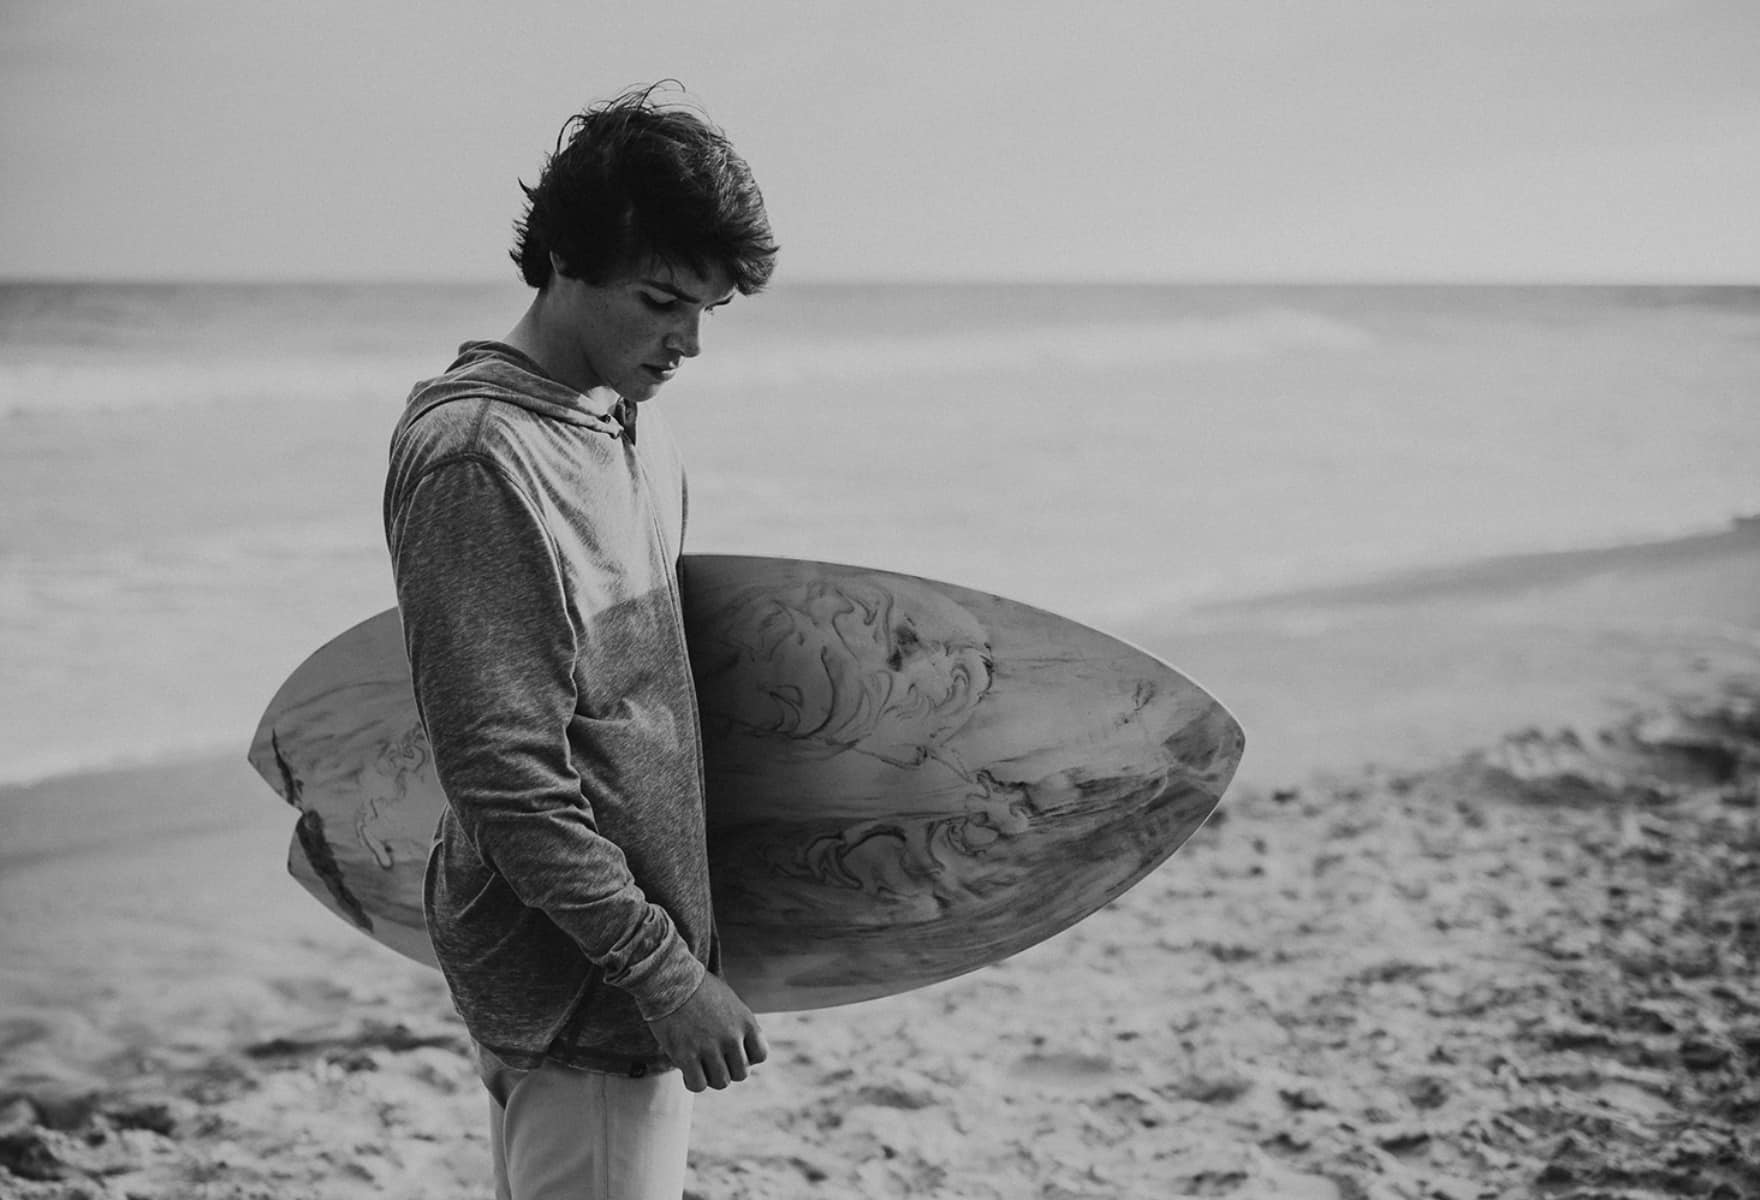 Young surfer holding a surfboard on the beach, gazing down at the sand, with the ocean in the background